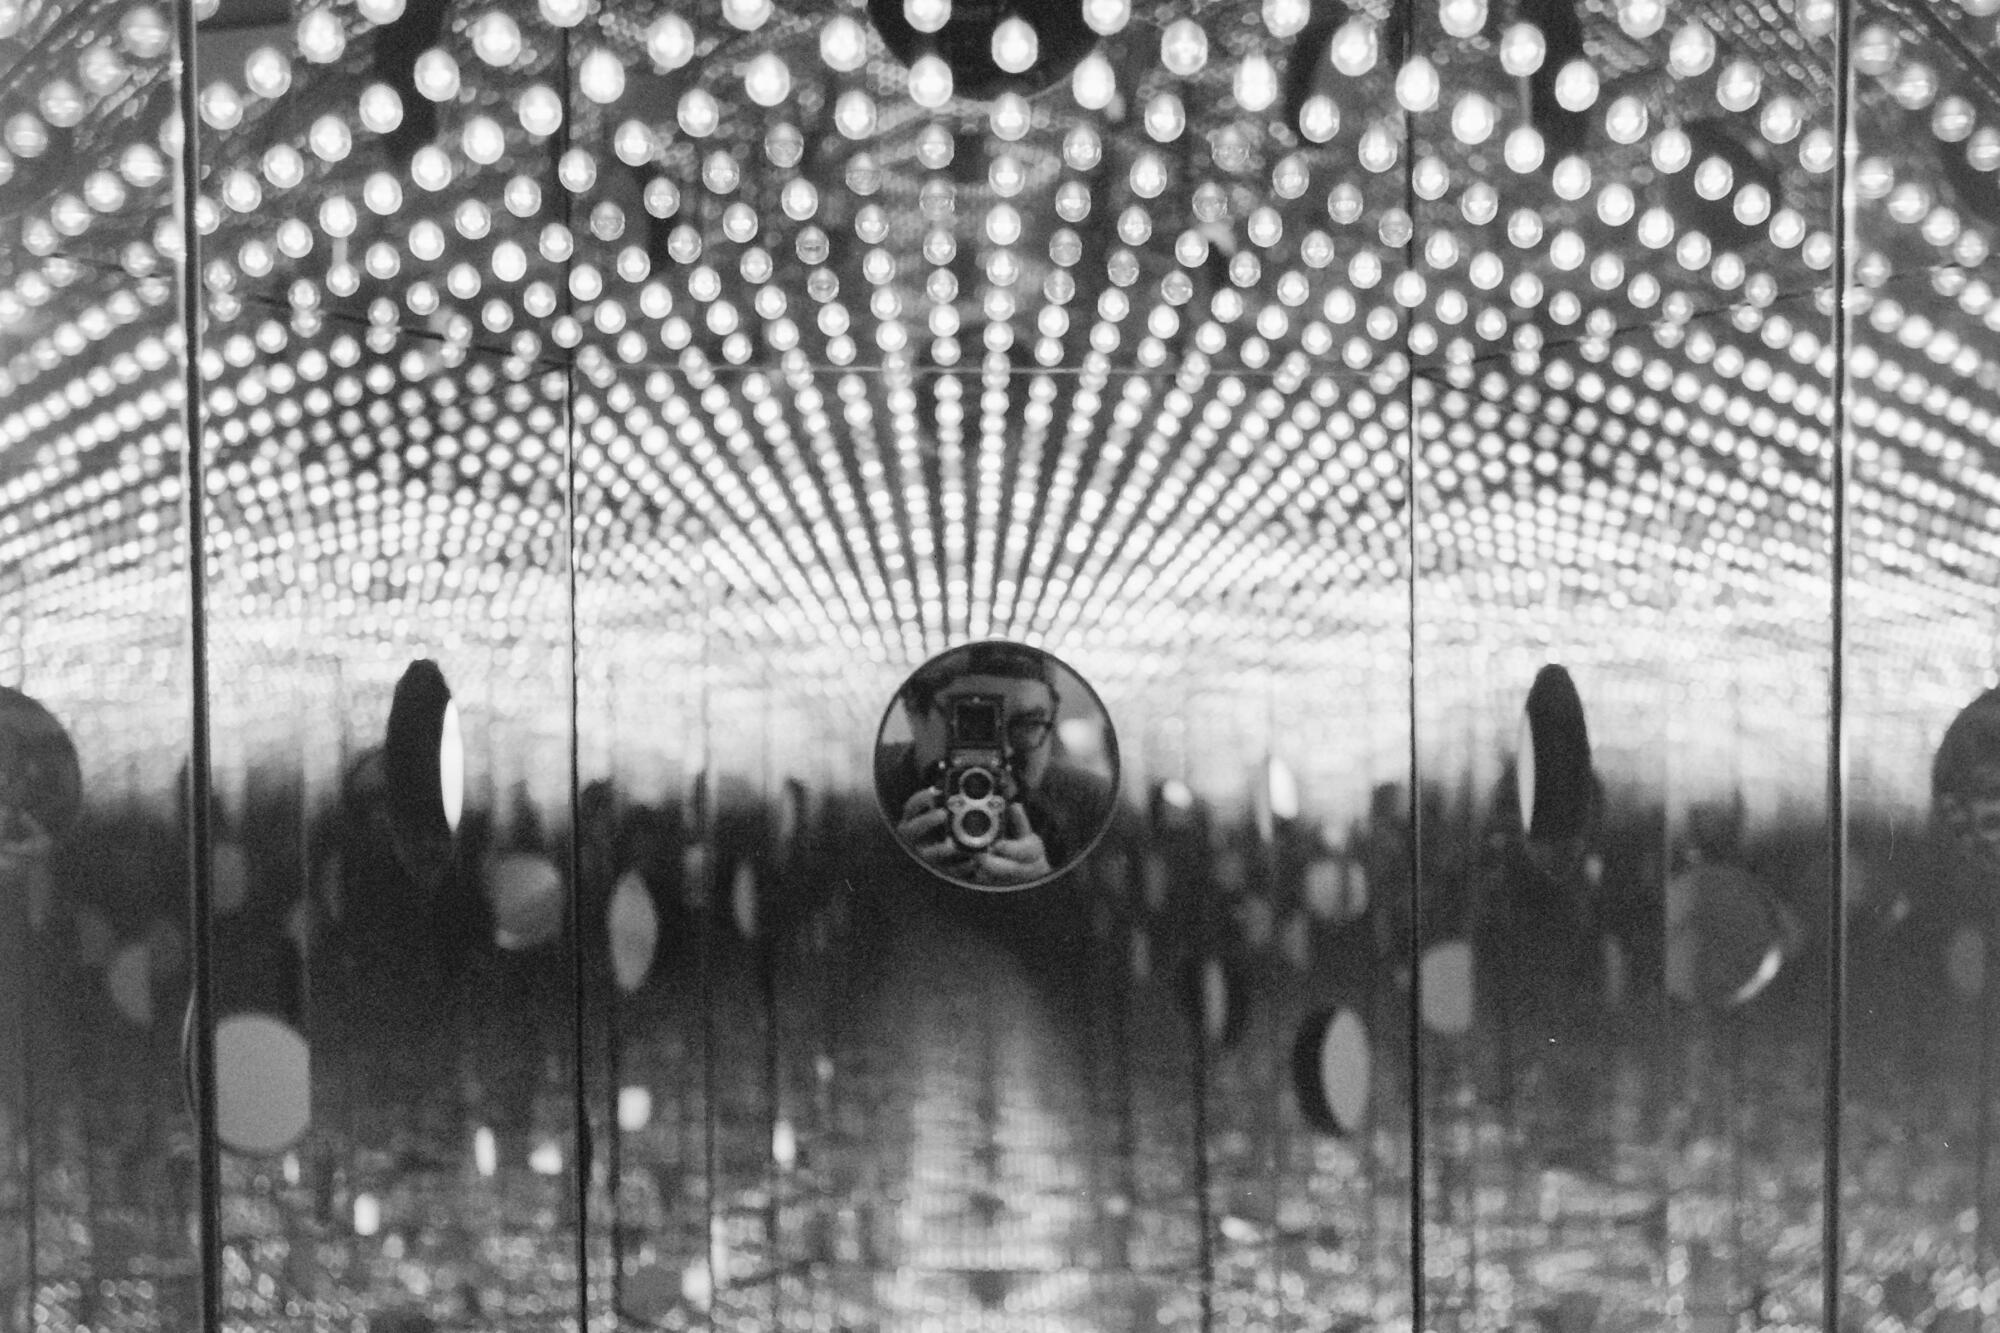 Greg Yee, lost in the lightscapes of Yayoi Kusama at the Broad on a day trip with friends.